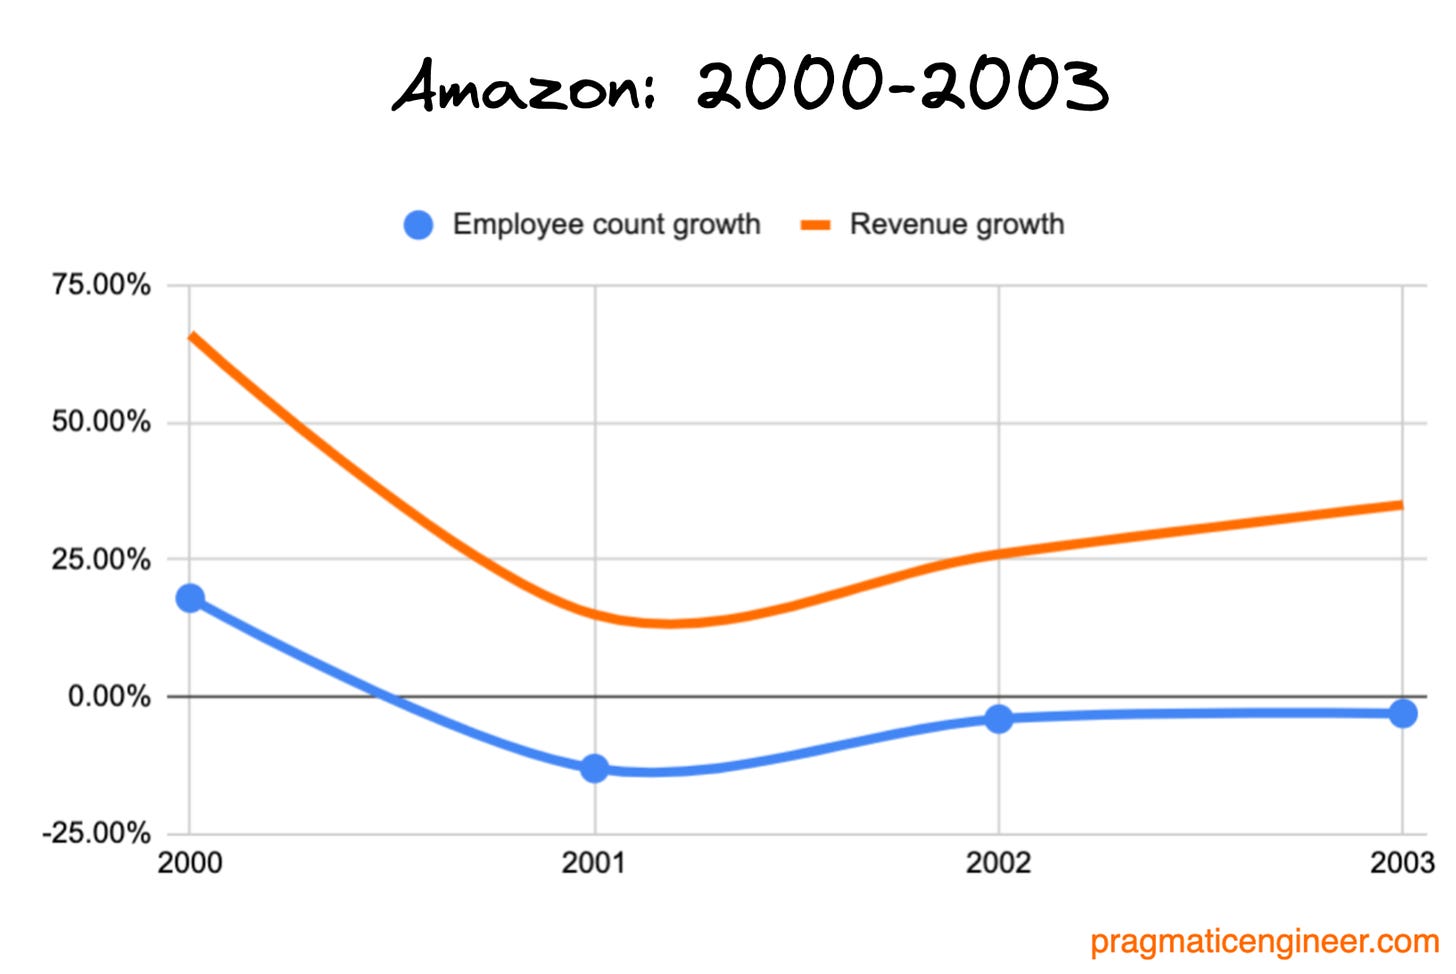 In 2001, during the Dotcom Bust, Amazon’s revenue growth slowed sharply. Amazon responded by letting staff go. For the next two years, it slightly reduced headcount, until year-on-year revenue growth was back  above 30% in 2004